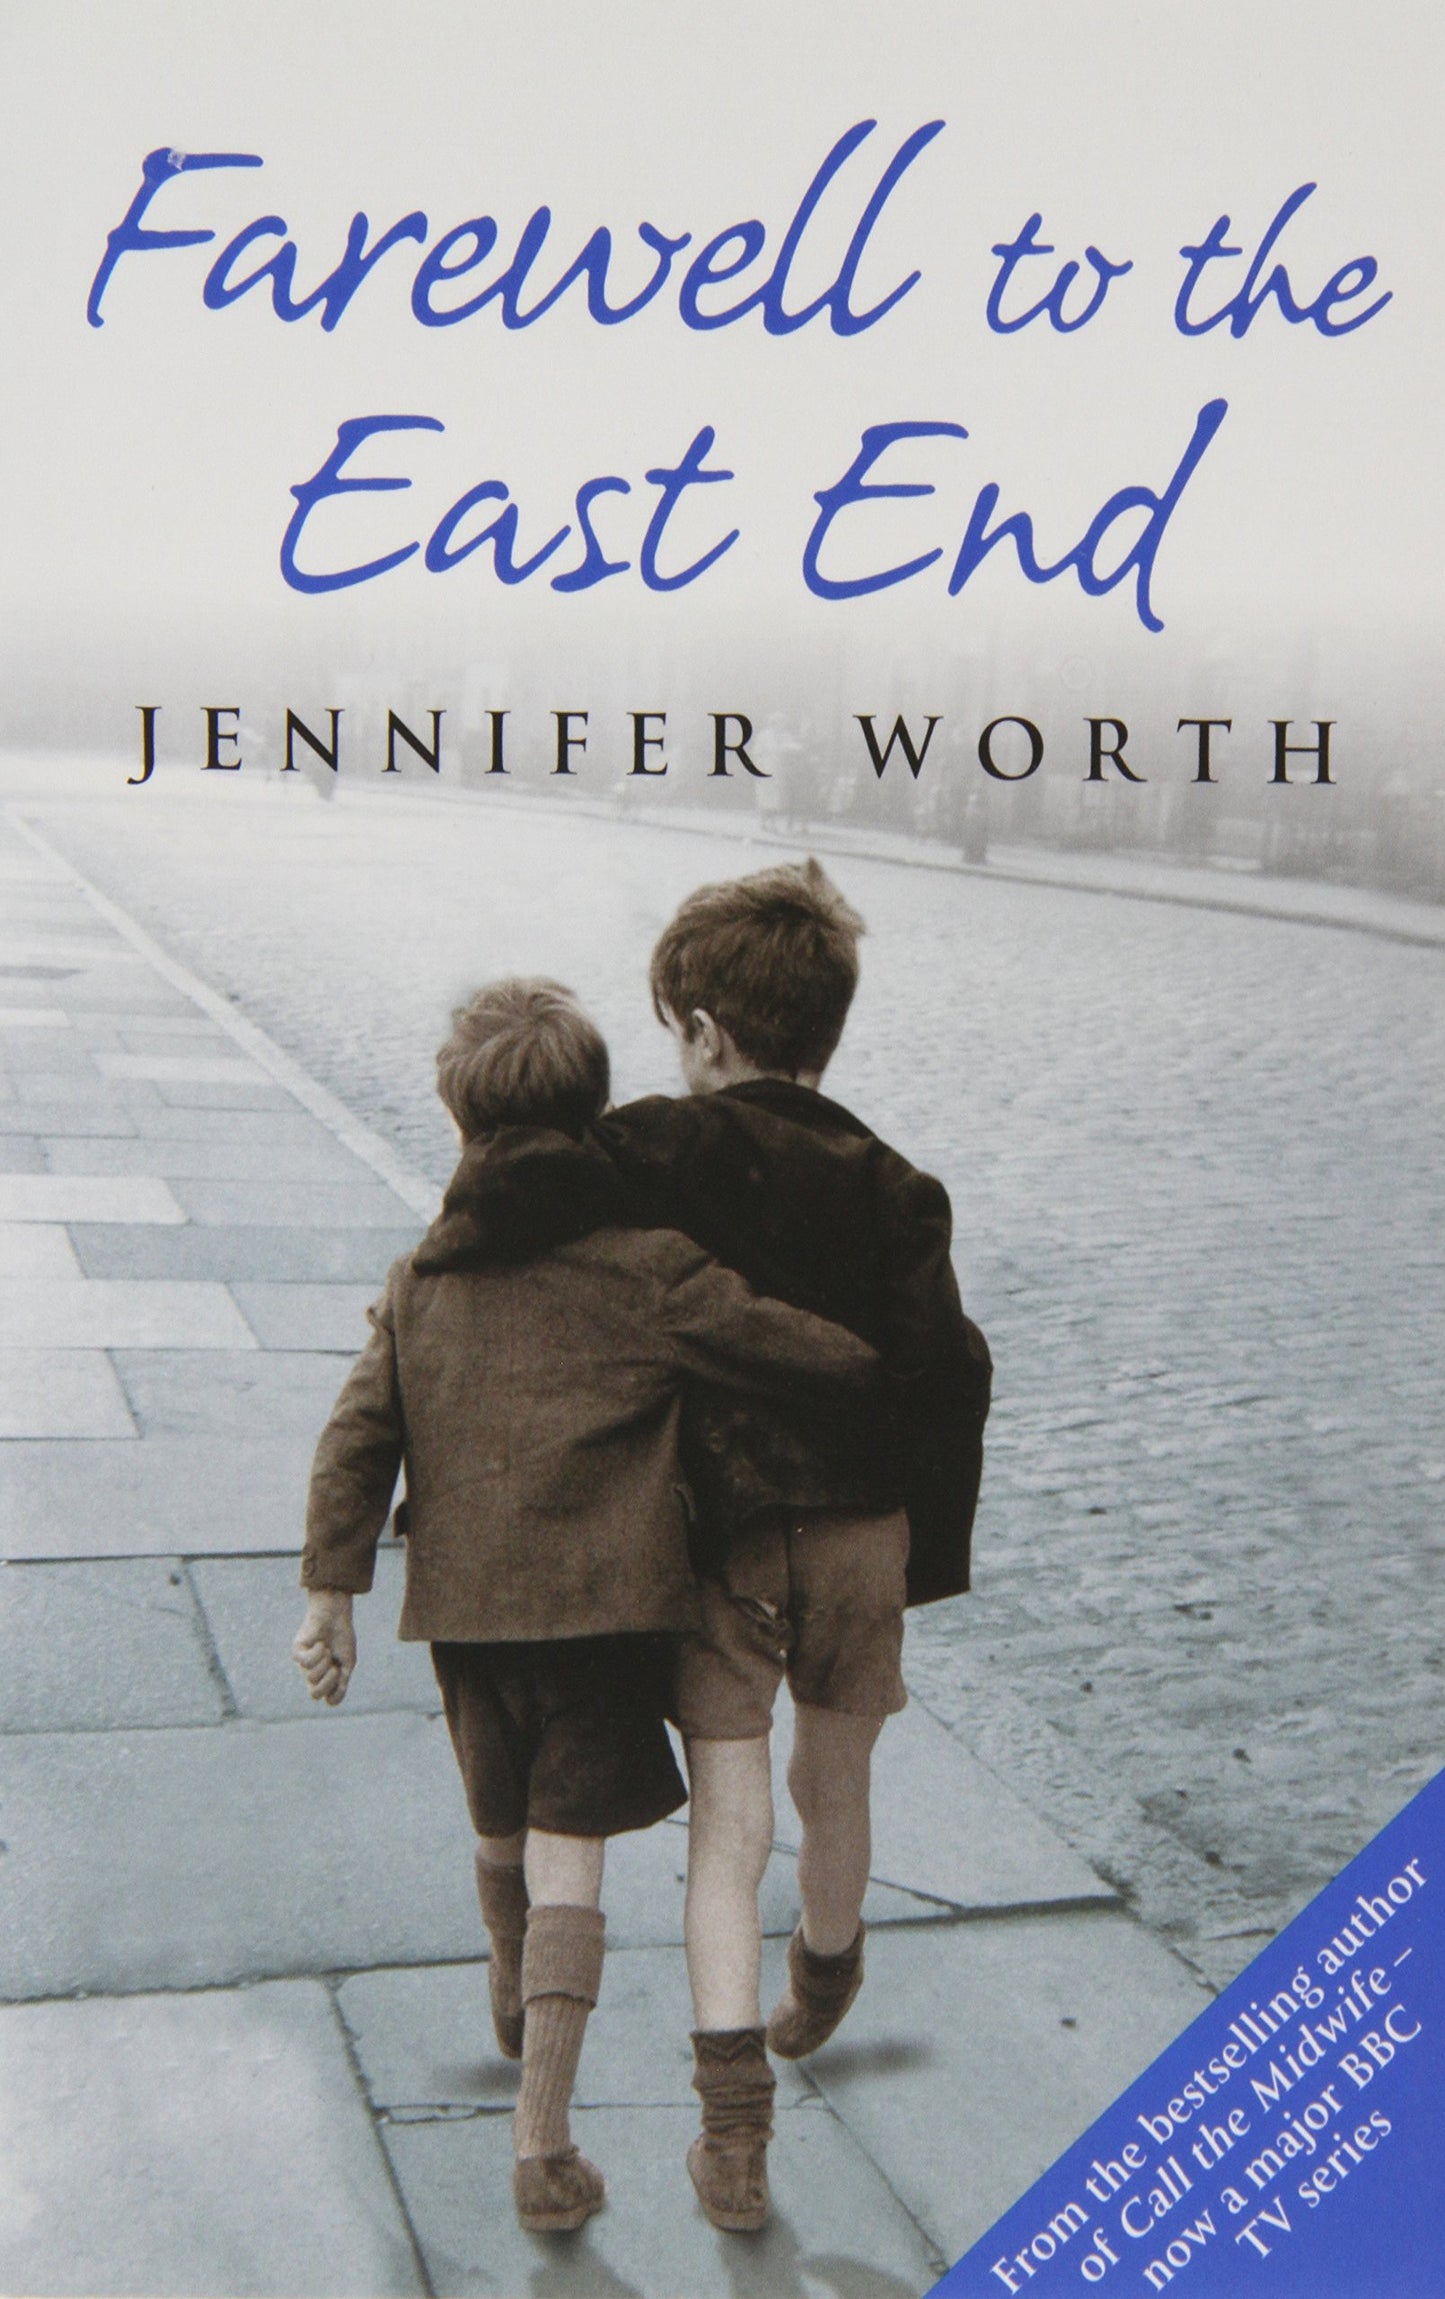 Farewell To The East End by Jennifer Worth (Paperback)